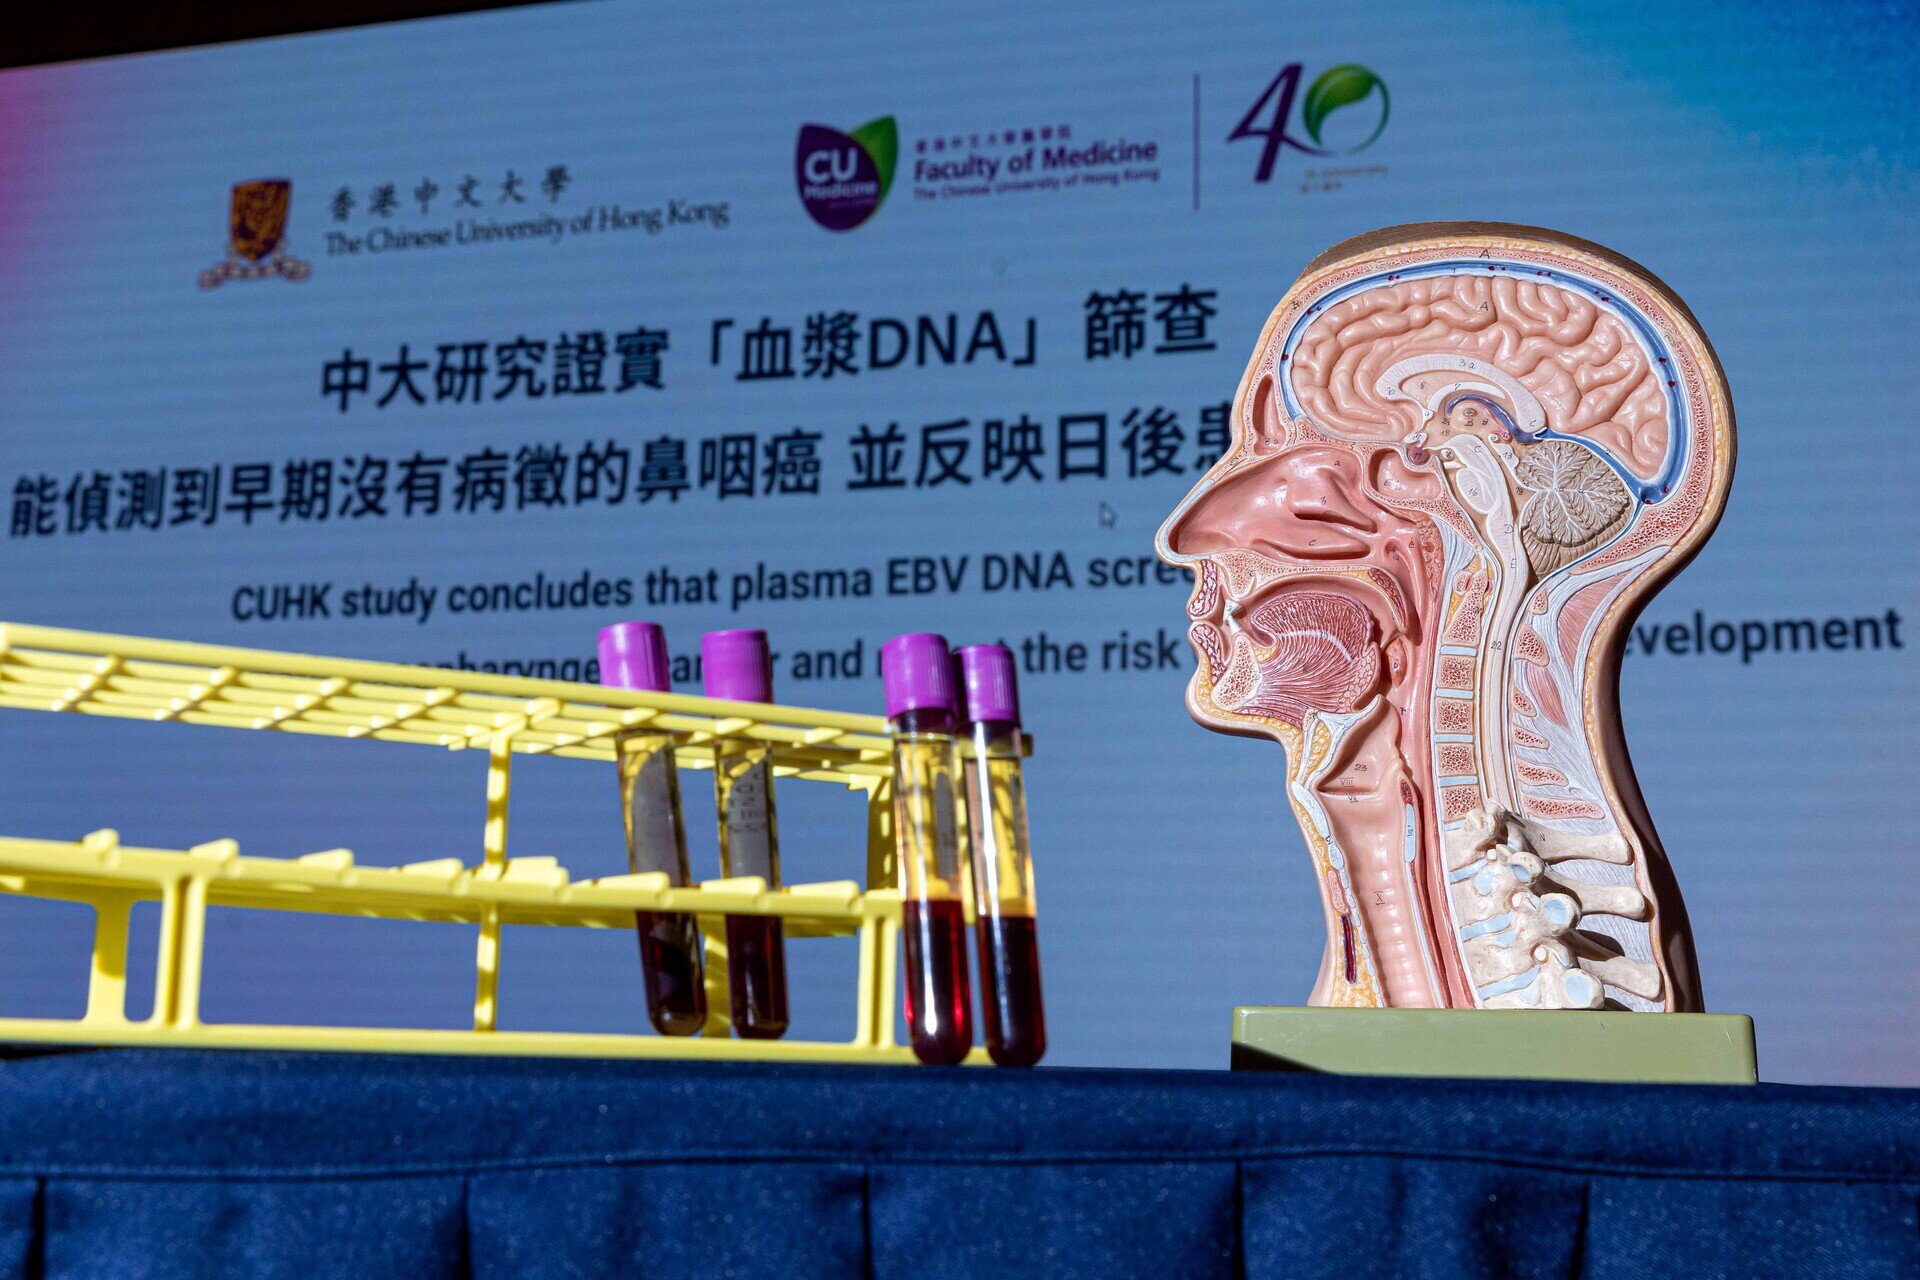 CUHK study concludes that plasma EBV DNA screening can detect early asymptomatic nasopharyngeal cancer and reflect the risk of future cancer development 